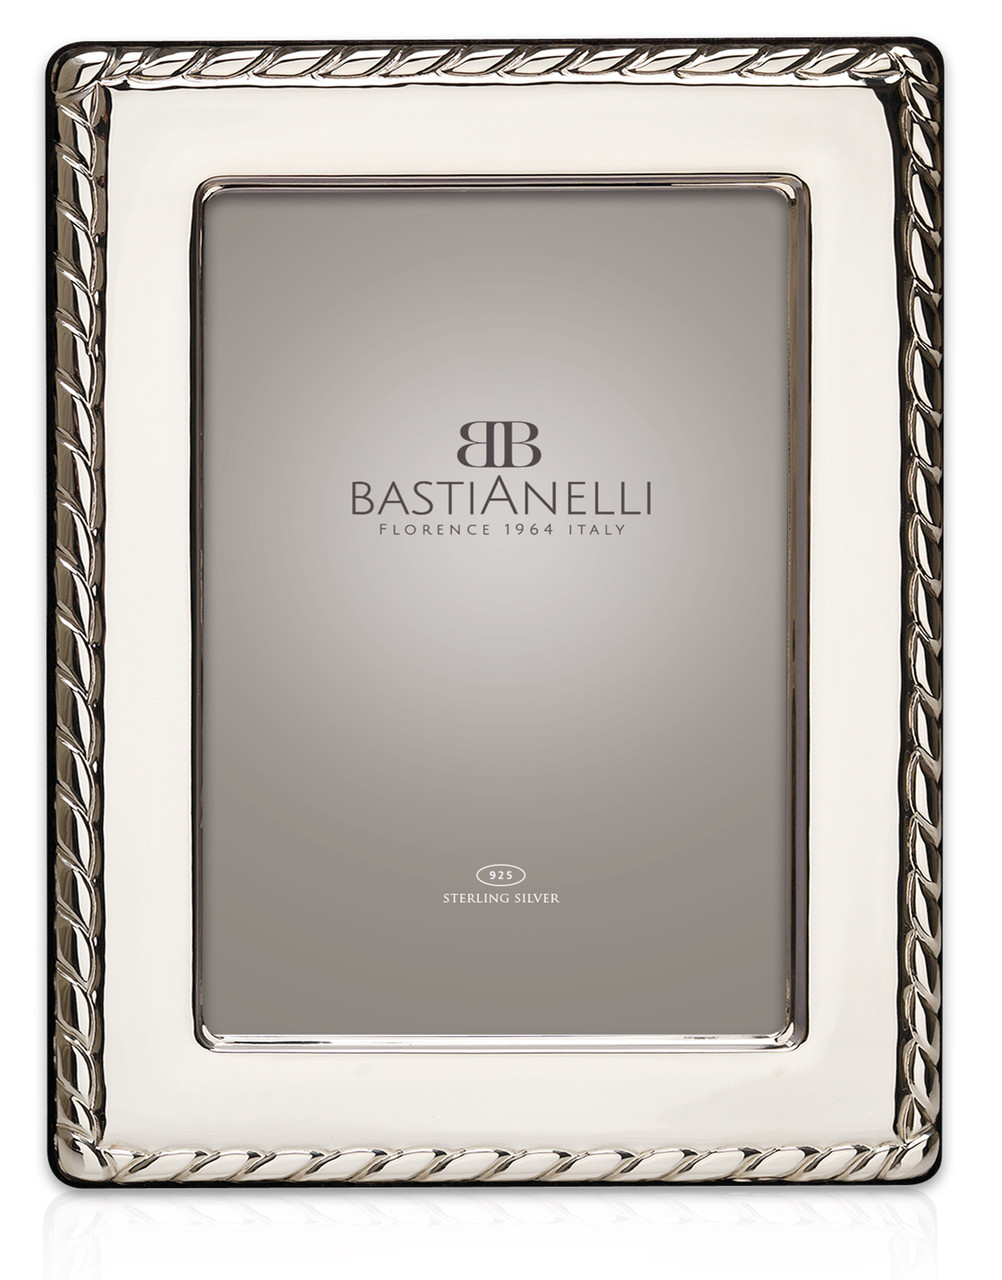 https://cdn11.bigcommerce.com/s-8m4gs/images/stencil/1280x1280/products/4068/7631/1795-1015_Corda_Sterling_Silver_4x6_Picture_Frame_by_Bastianelli__64443.1589468247.jpg?c=2